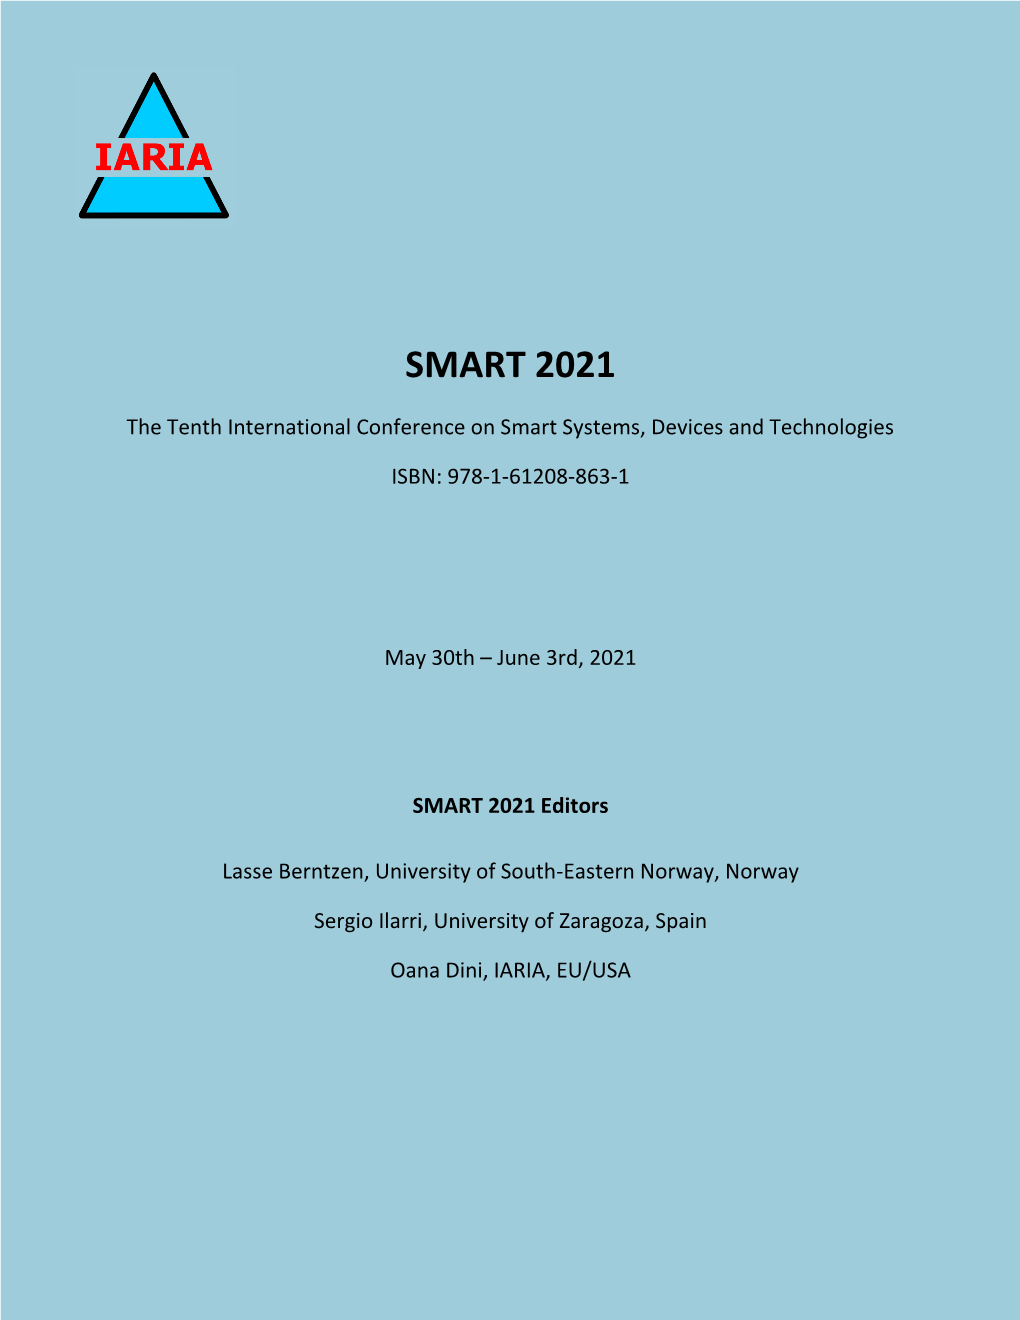 SMART 2021, the Tenth International Conference on Smart